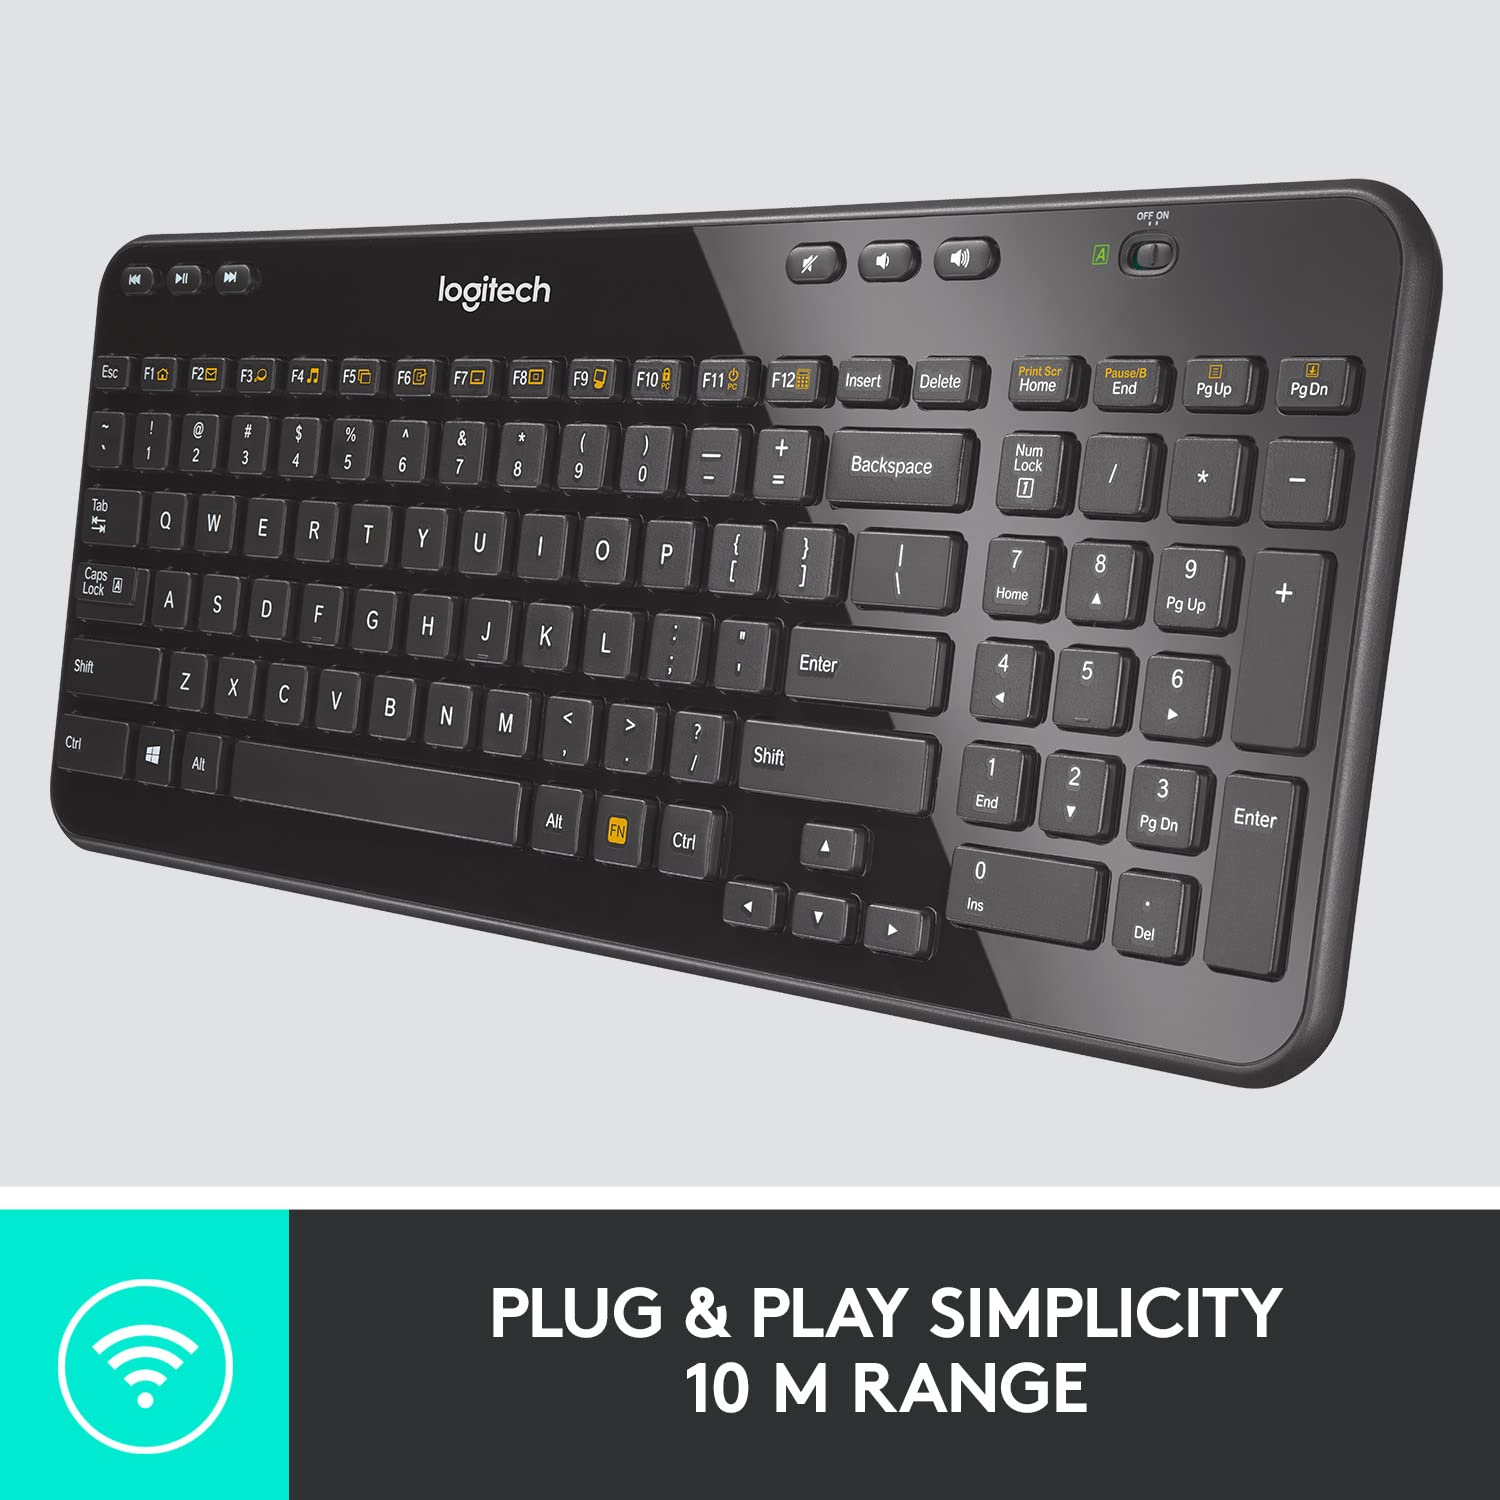 Logitech K360 Compact Wireless Keyboard for Windows, 2.4GHz Wireless, USB Unifying Receiver, 12 F-Keys, 3-Year Battery Life, Compatible with PC, Laptop, QWERTY UK English Layout - Black